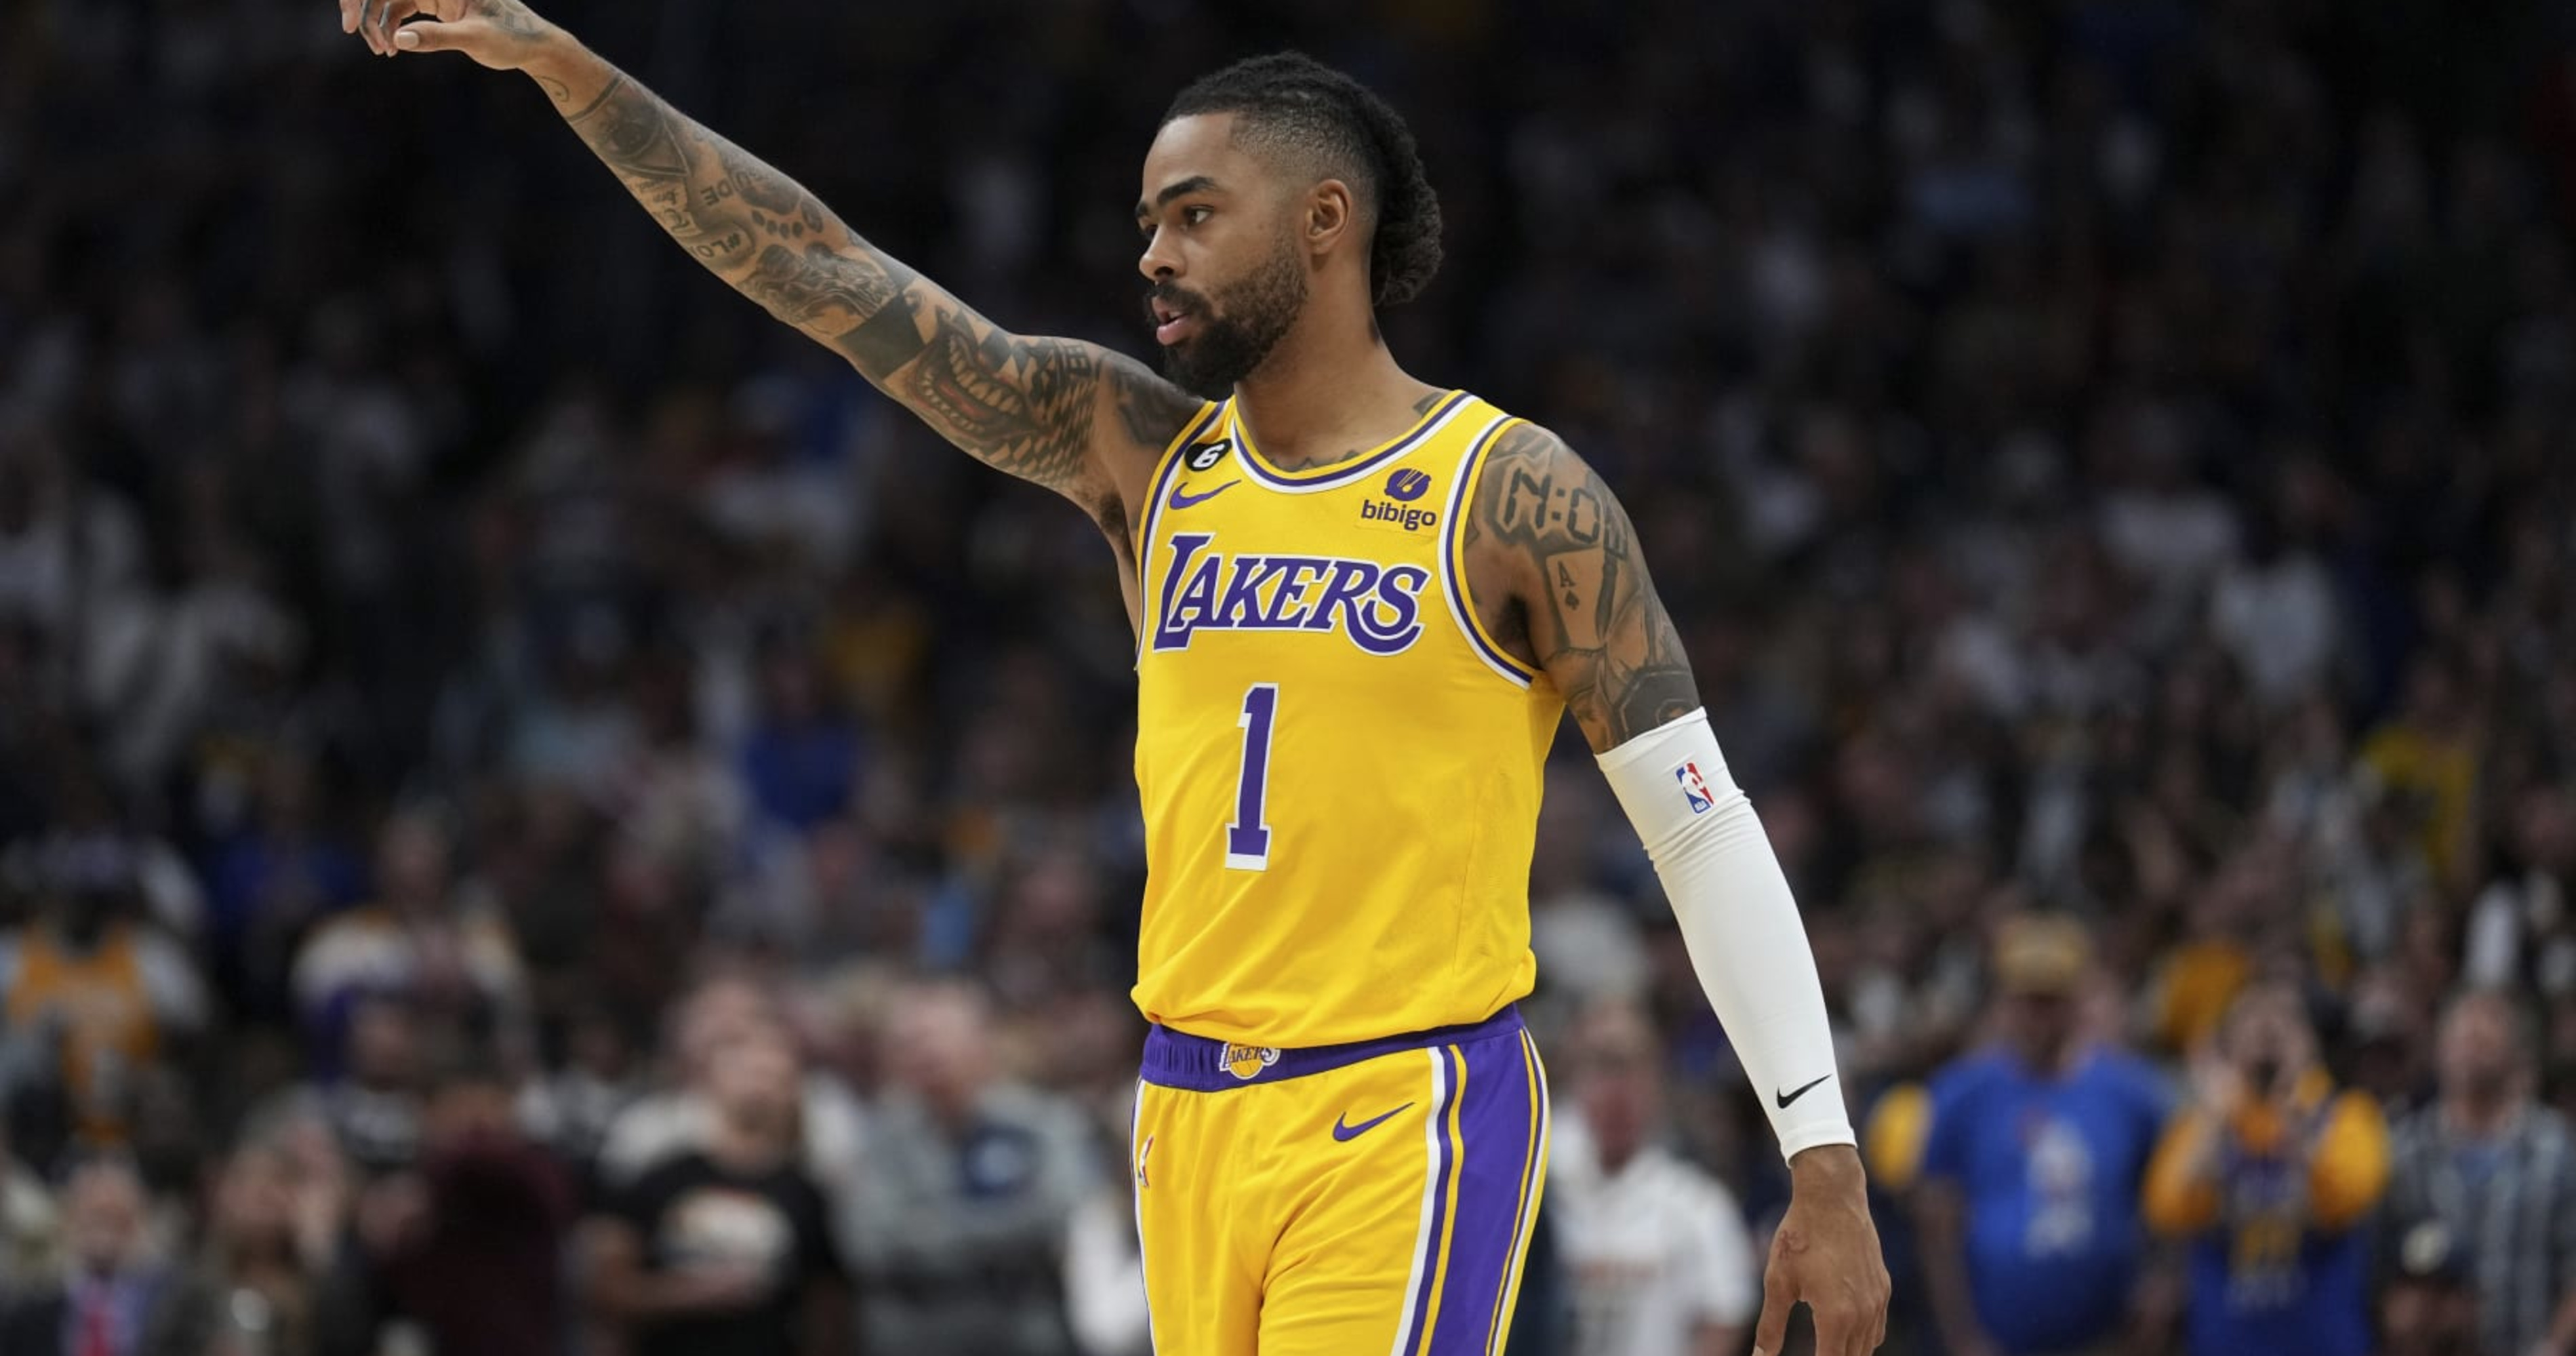 NBA Free Agent Rumors: Magic Johnson is gone, so D'Angelo Russell